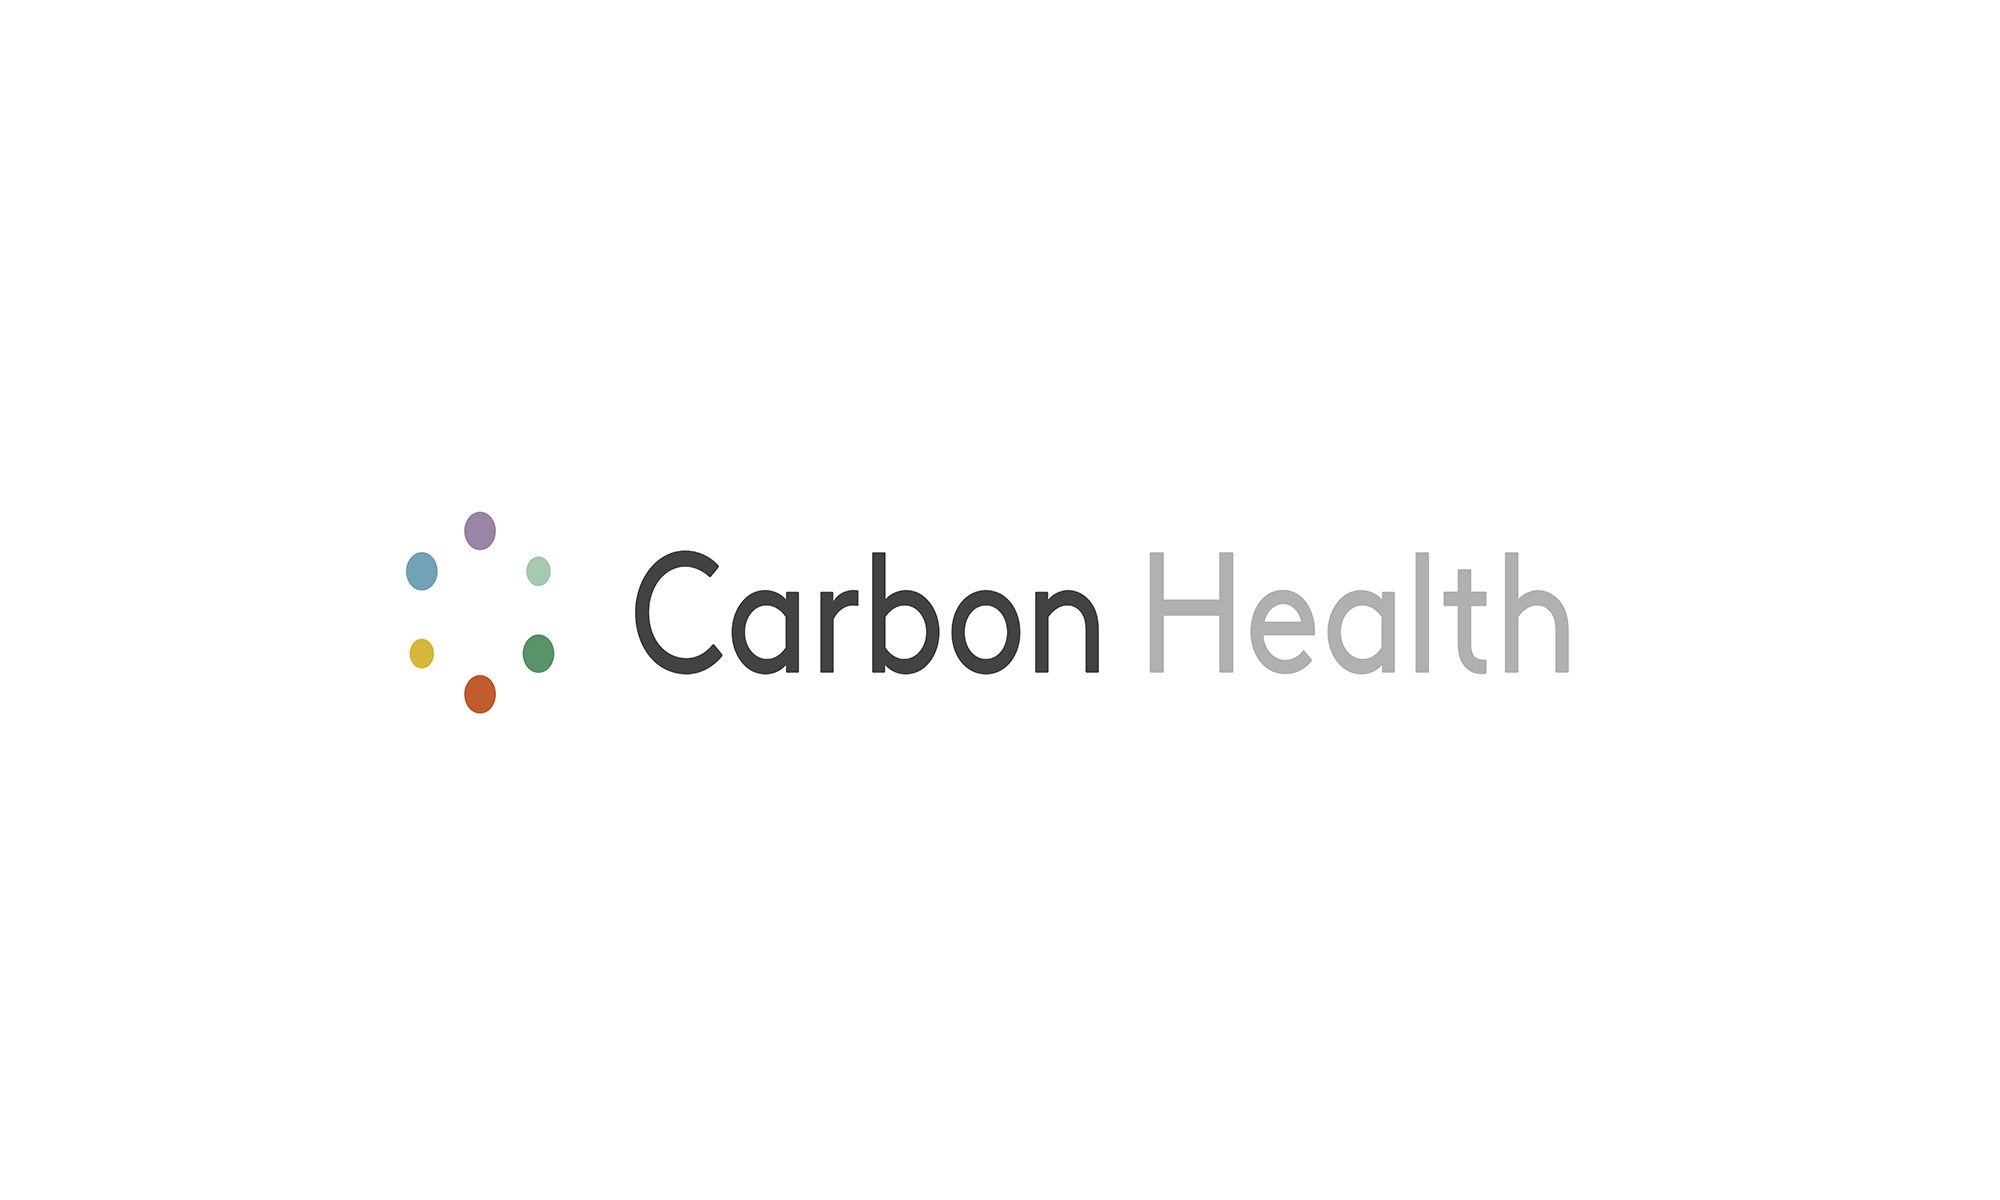 Carbon Health Lays off 200 employees LayoffsTracker